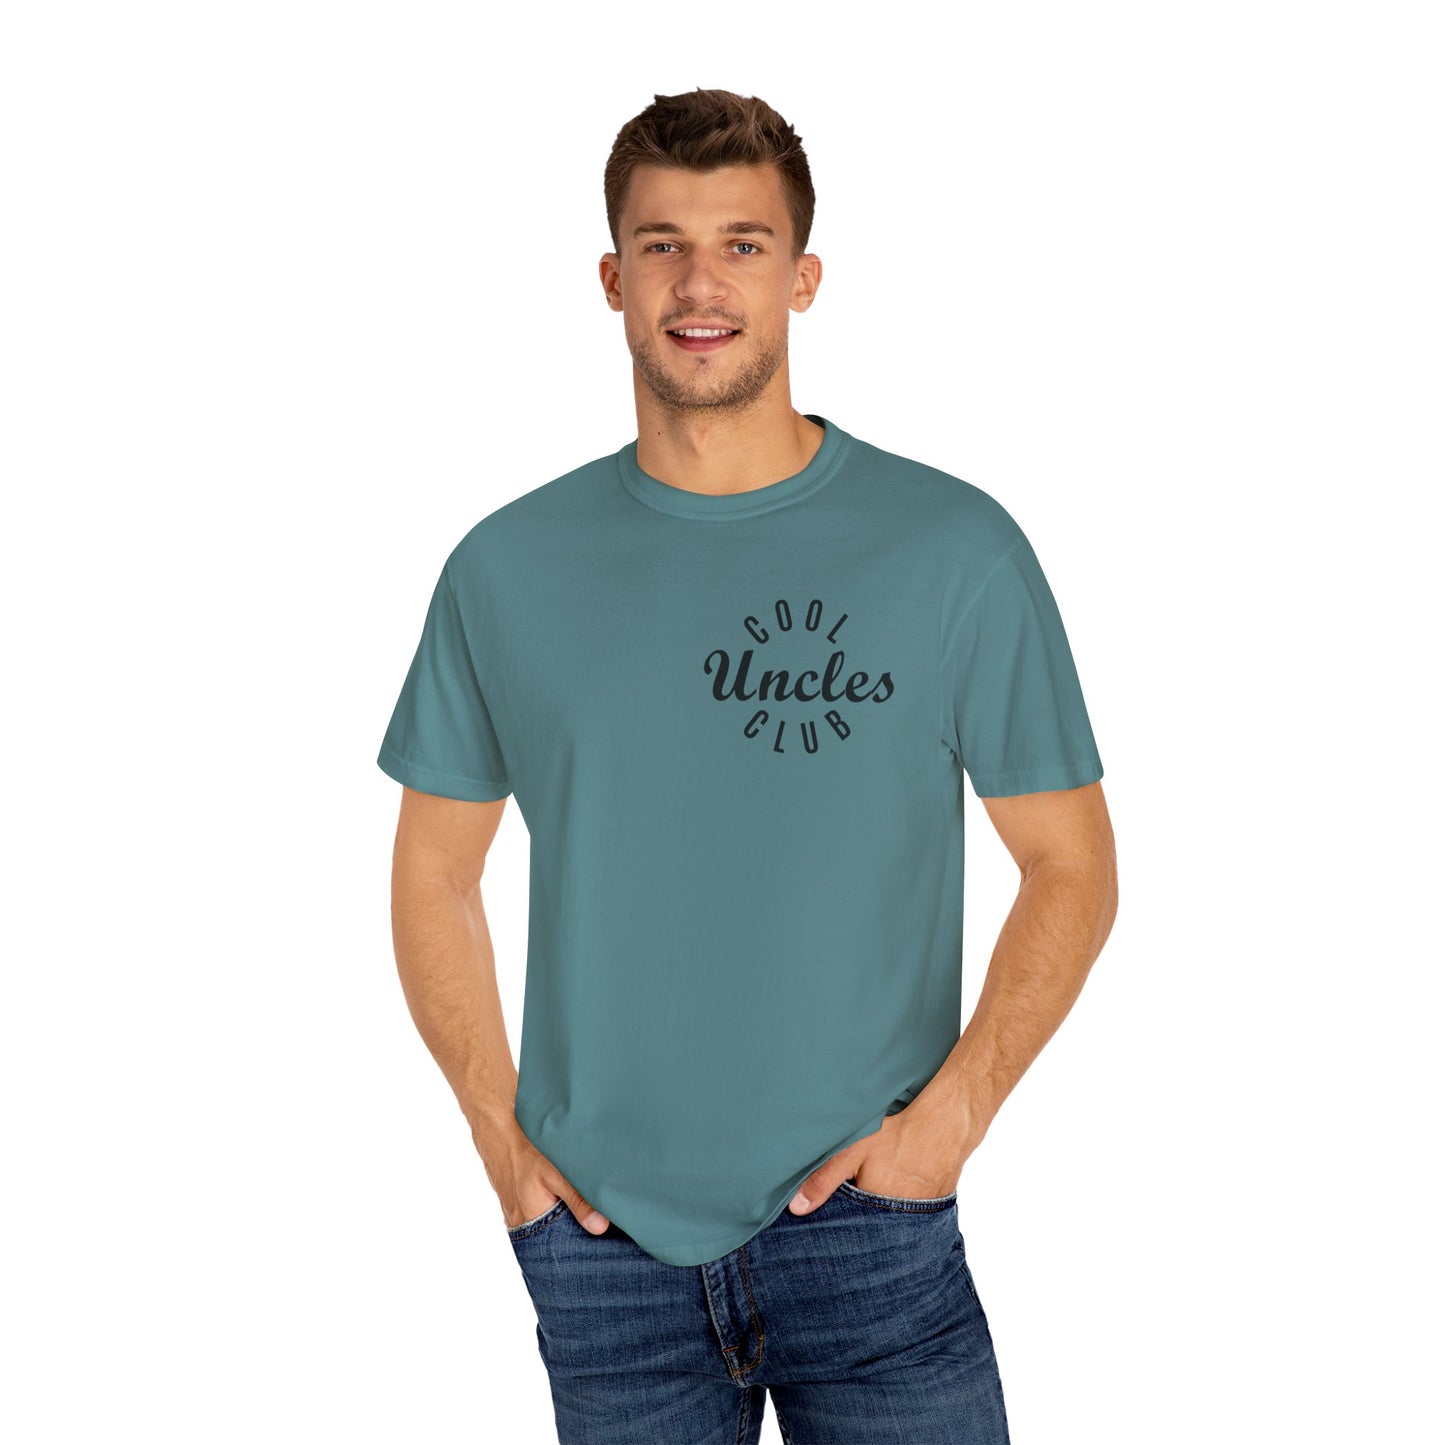 Cool Uncles Club Shirt for Men, Cool Uncle T-Shirt for New Uncle, Funny Gift for Uncle to Be, Pregnancy Announcement TShirt for Uncle, CC985